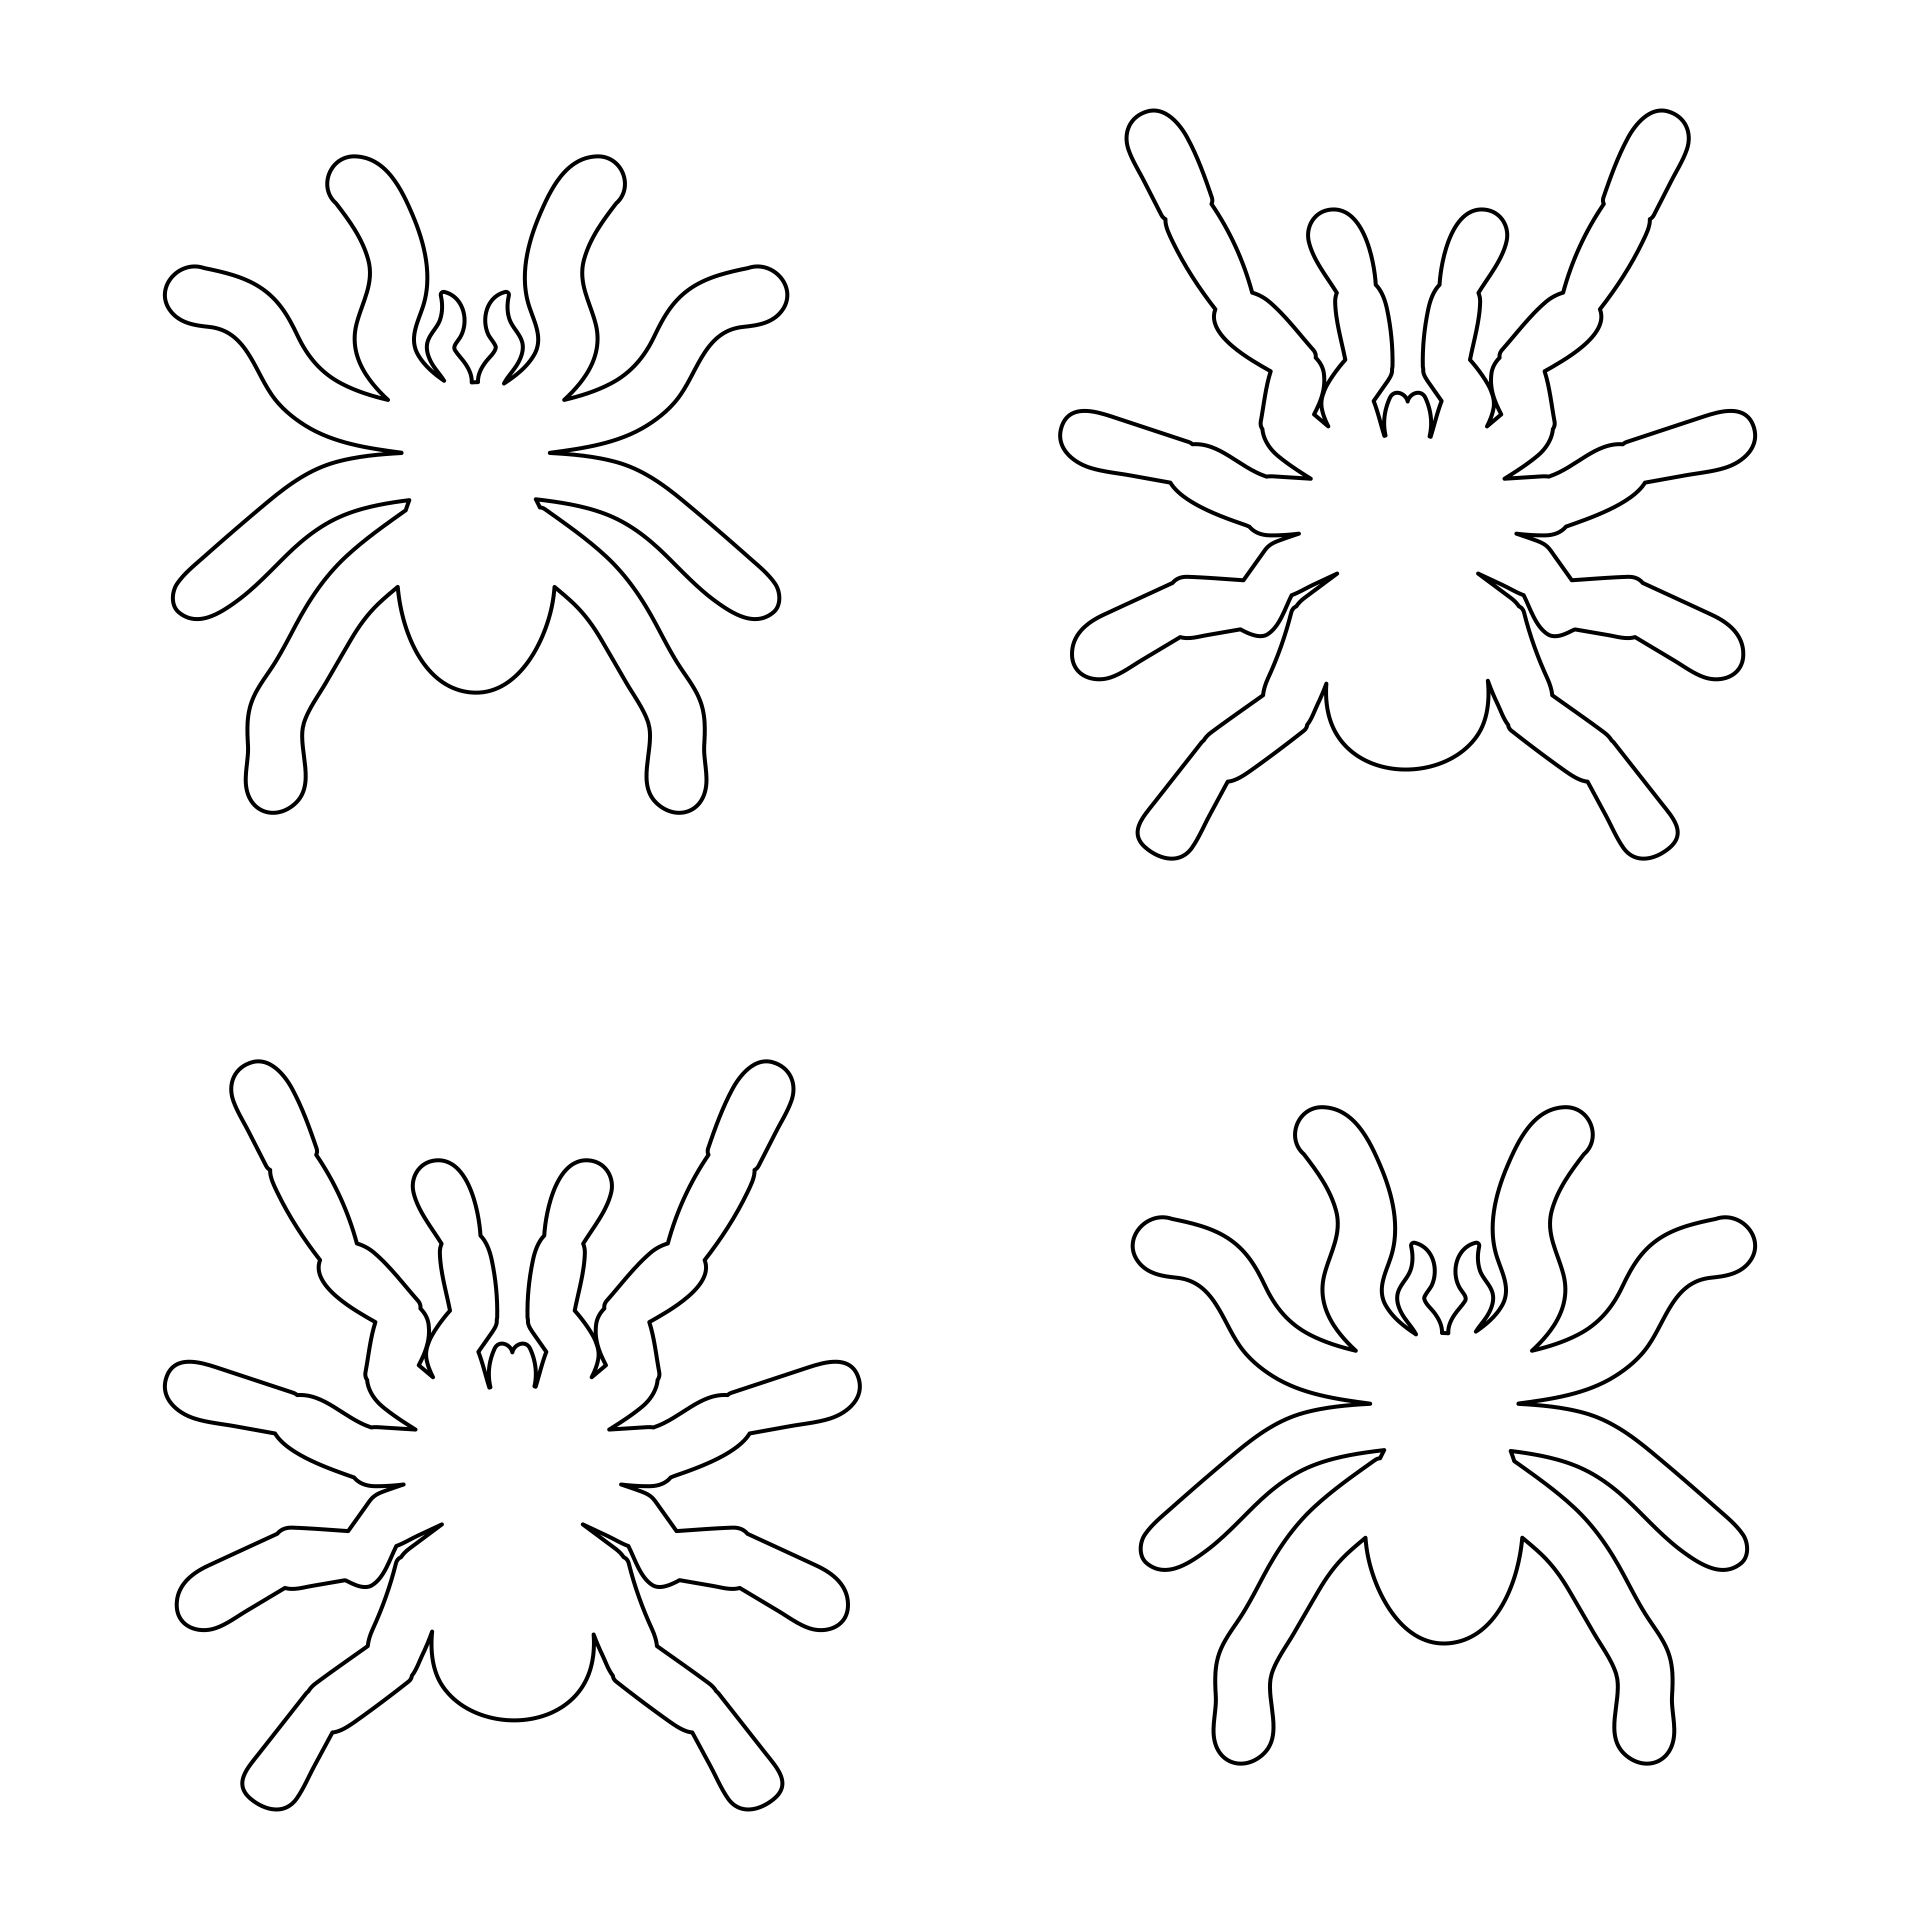 6-best-images-of-printable-spider-template-halloween-spider-templates